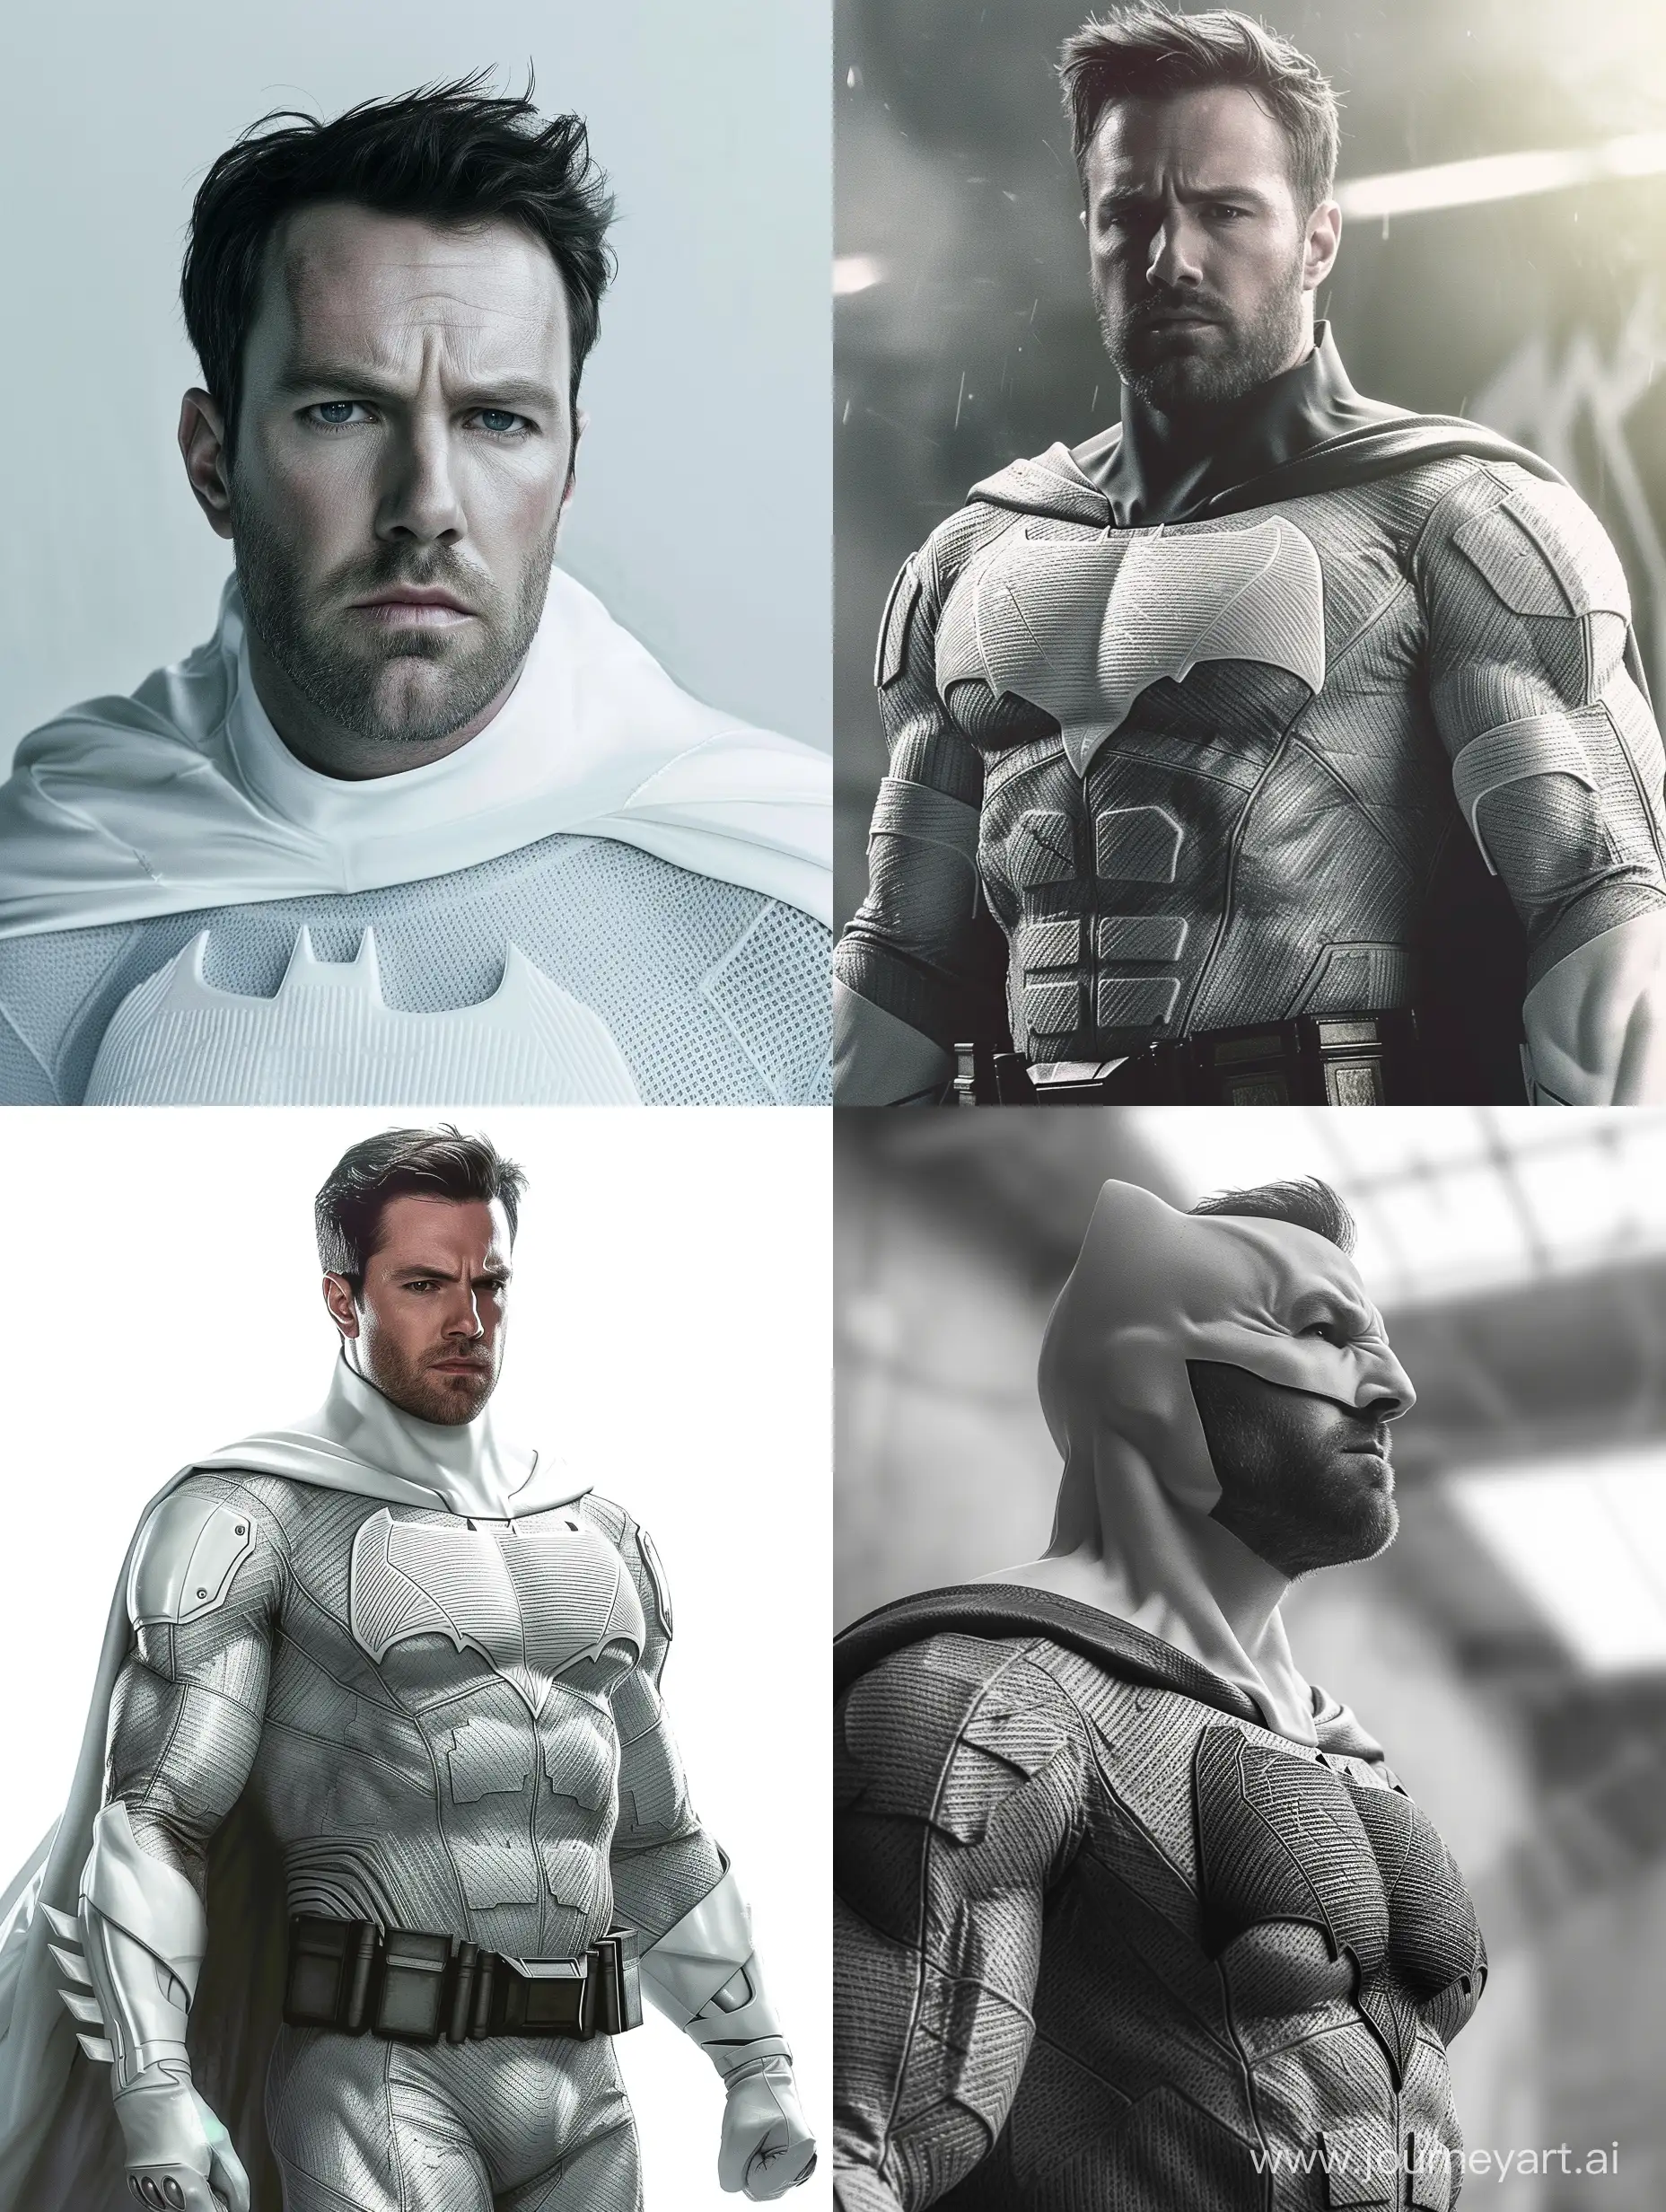 Batfleck-in-White-Heroic-Batman-Portrait-with-High-Contrast-Aesthetic